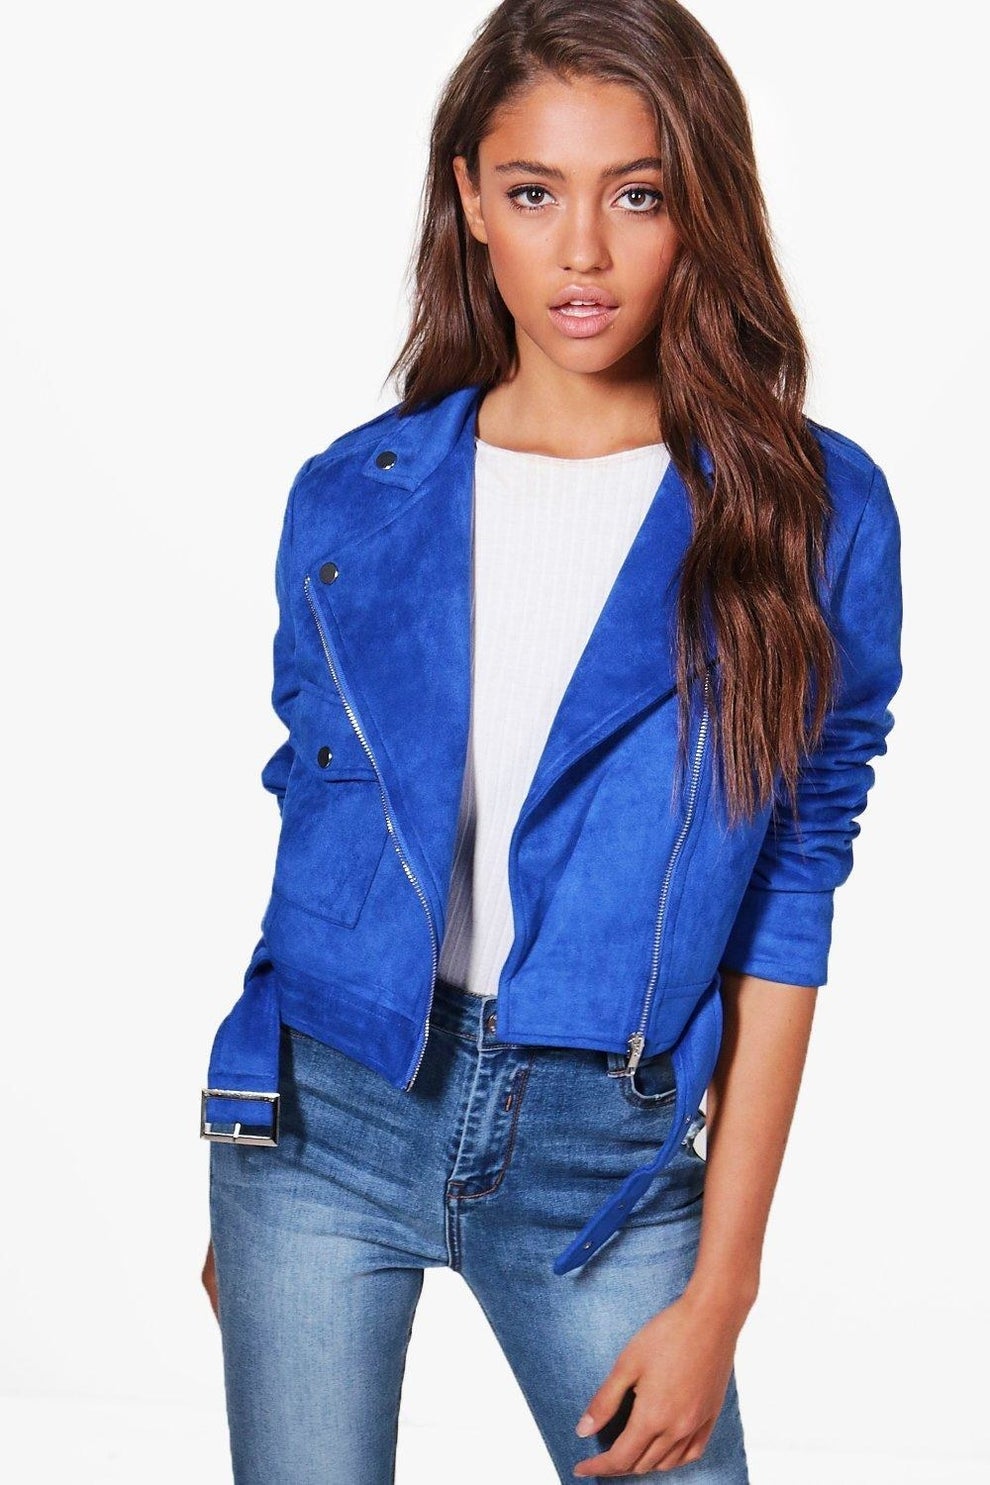 29 Jackets You'll Want To Live In This Fall